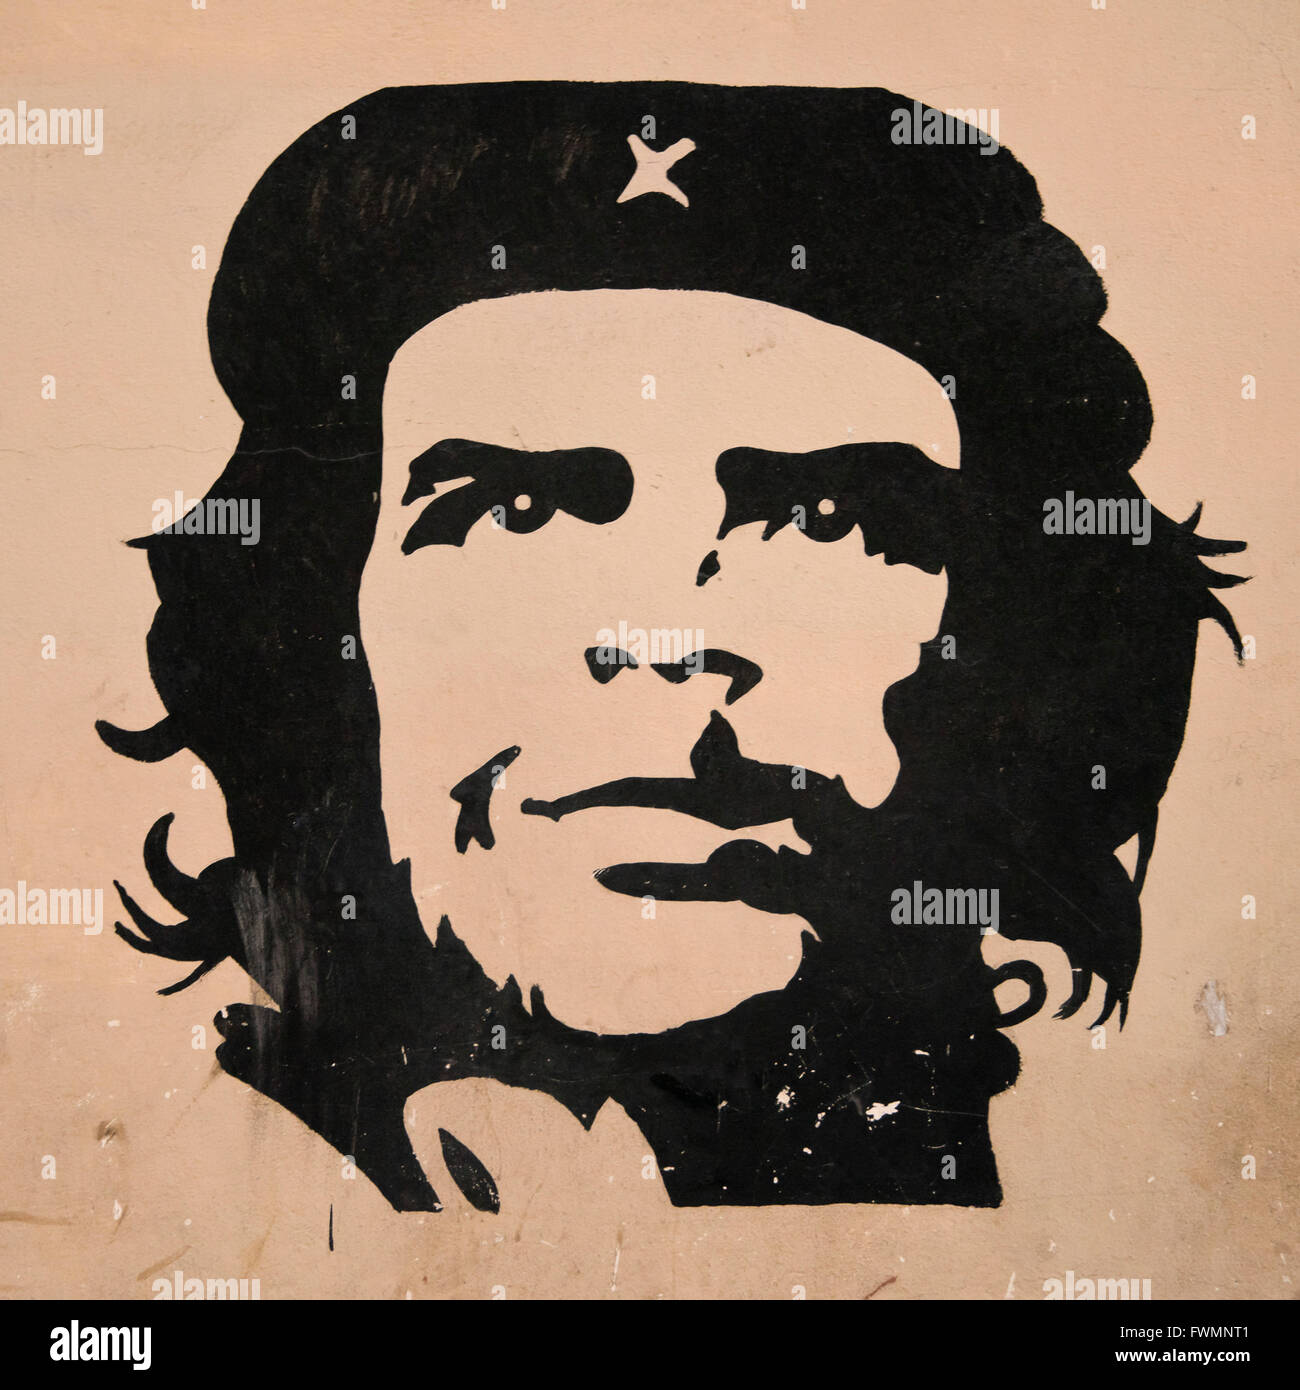 Square view of a Che Guevara mural on a wall in Cuba. Stock Photo